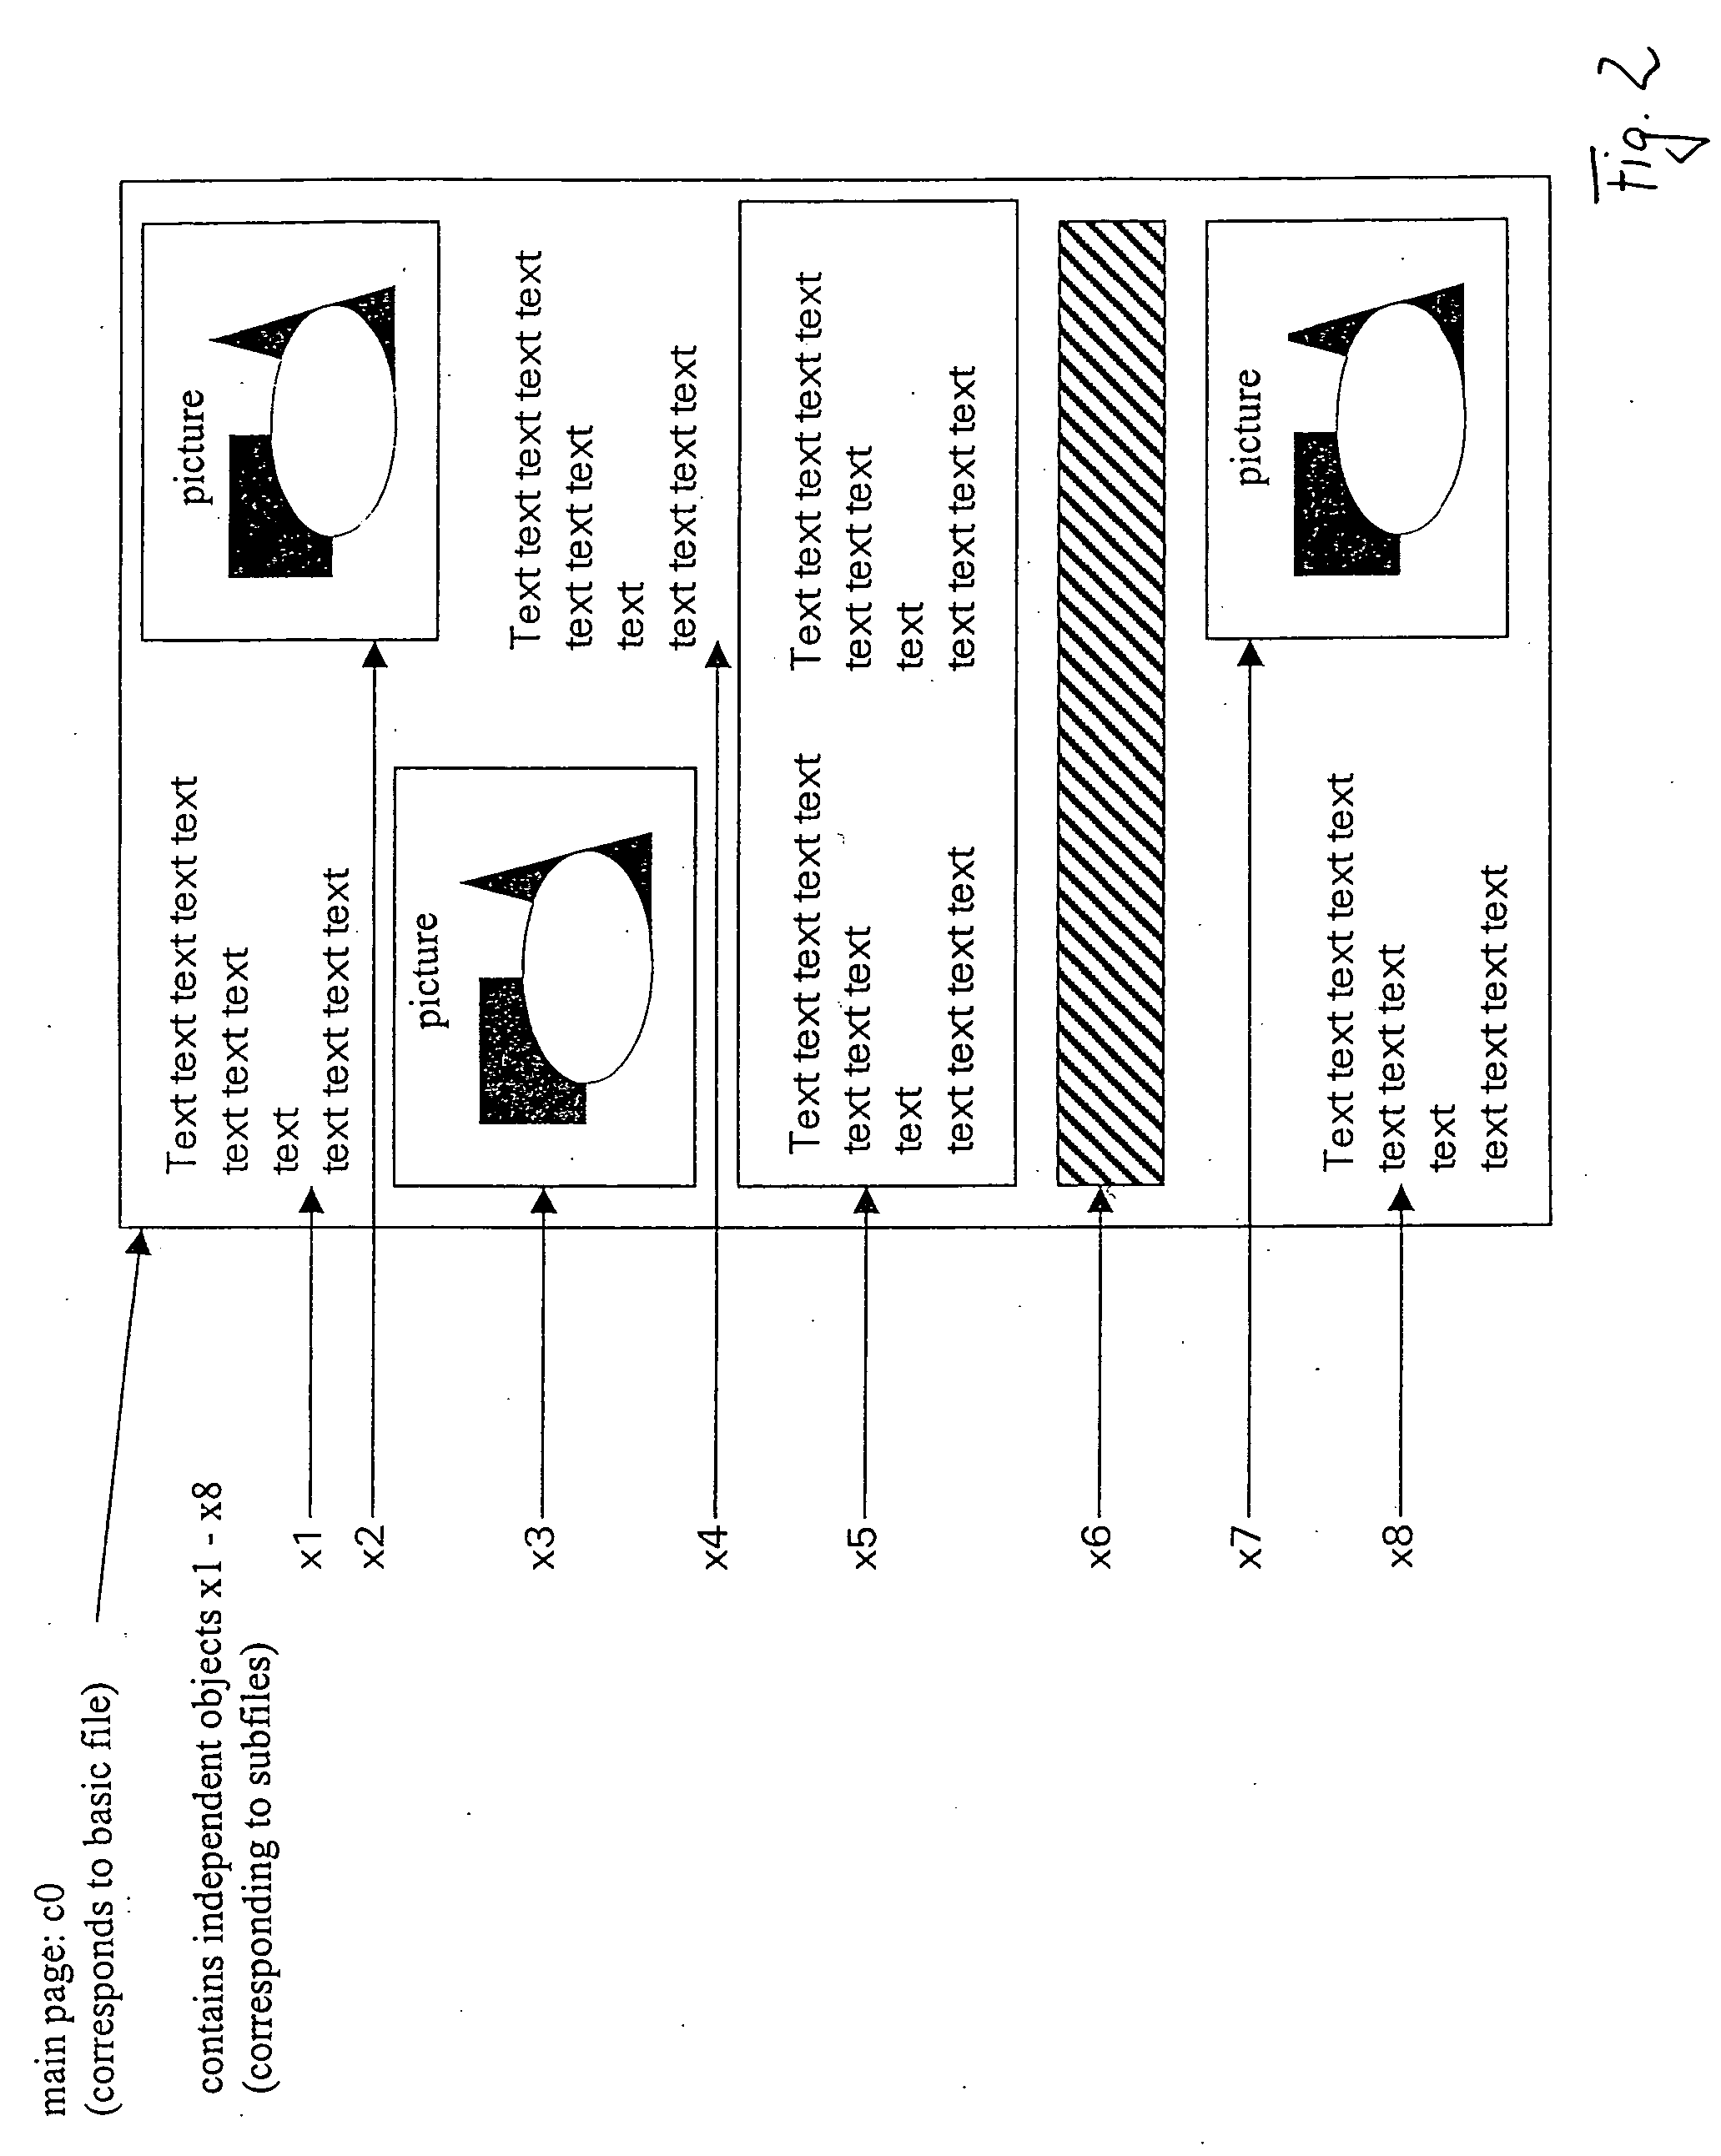 Method for prefetching of structured data between a client device and a server device